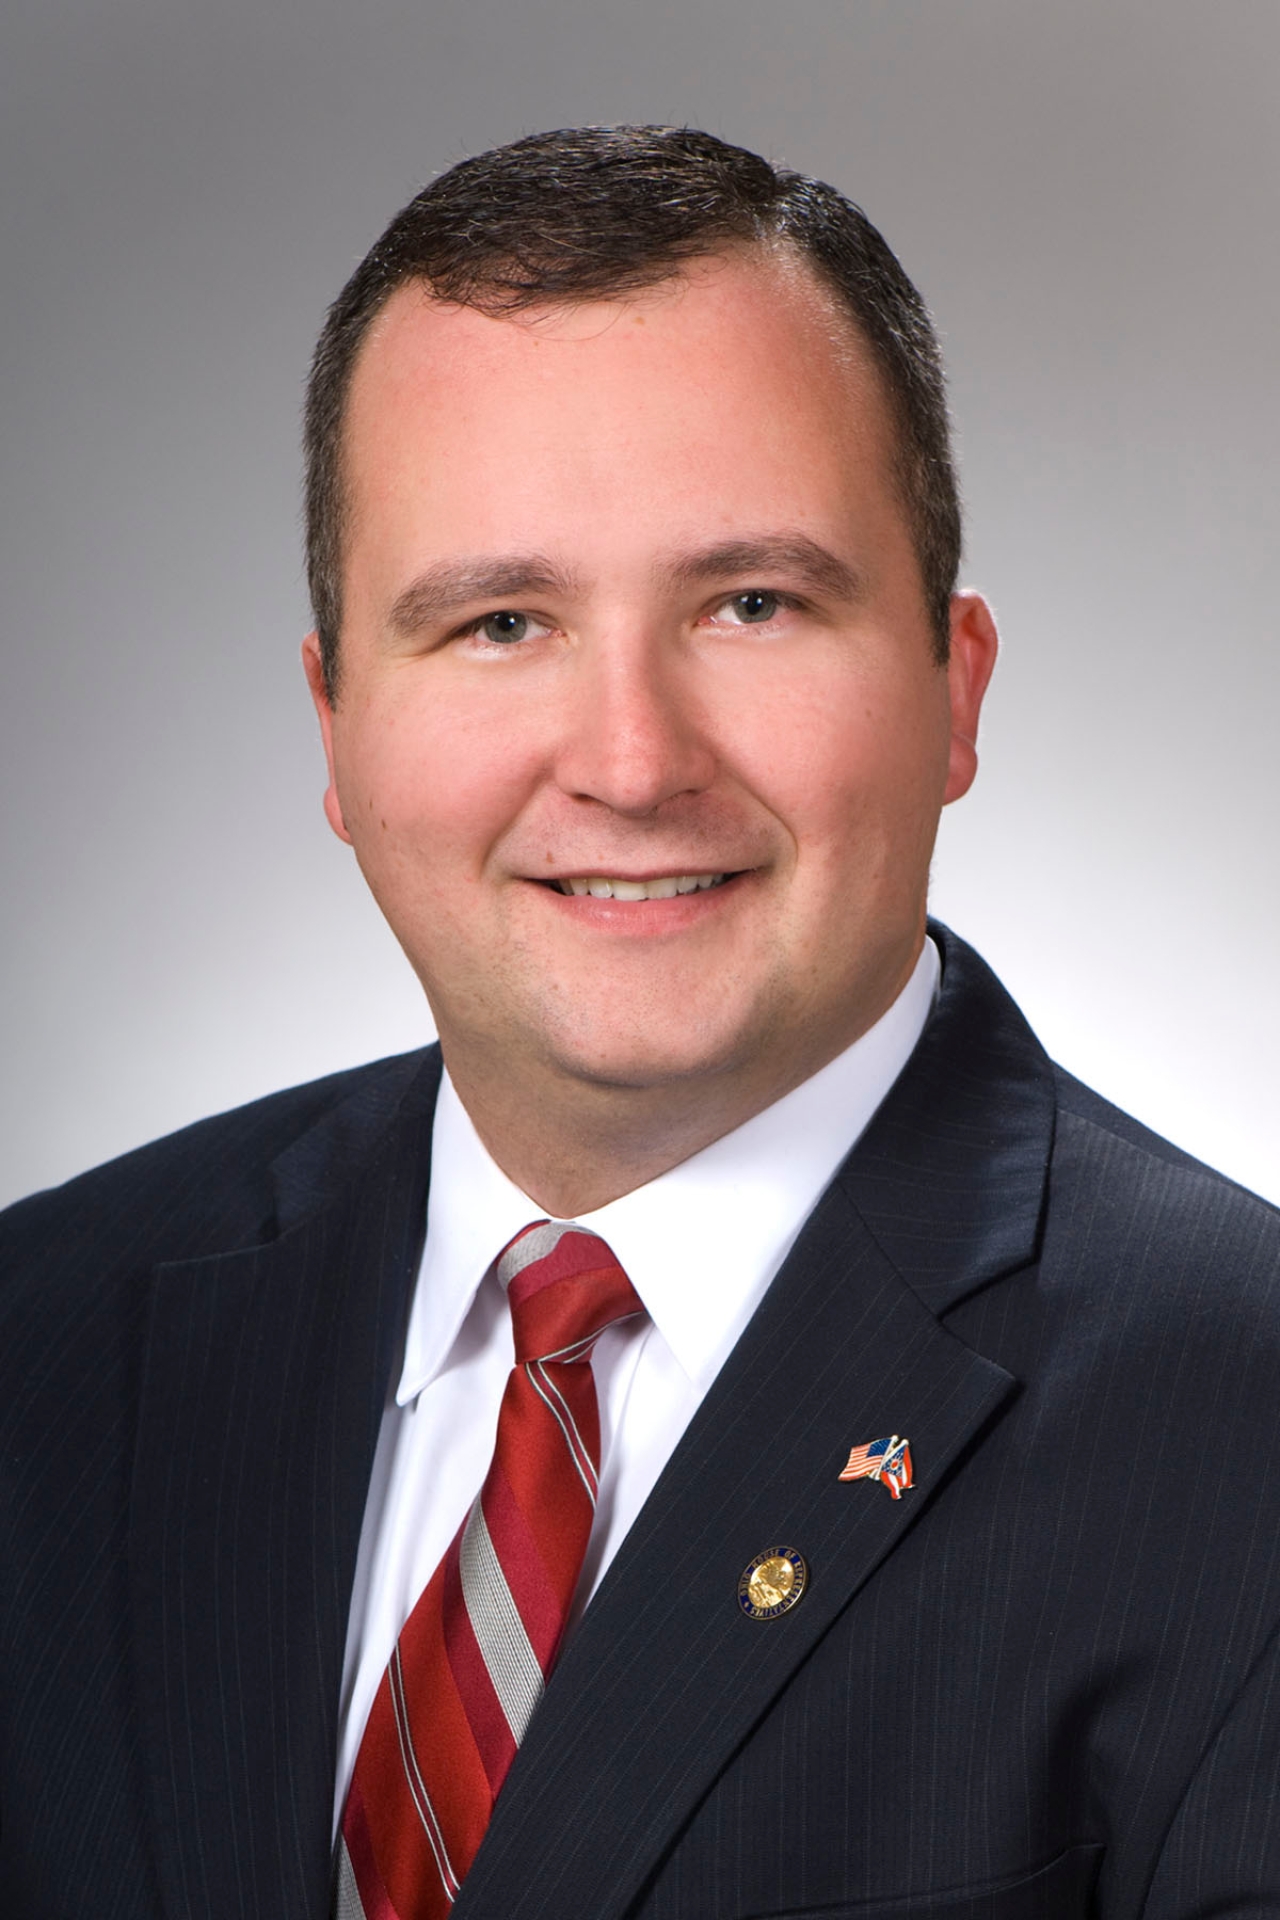 Rep. Retherford Named "Legislator of the Year" by AMVETS